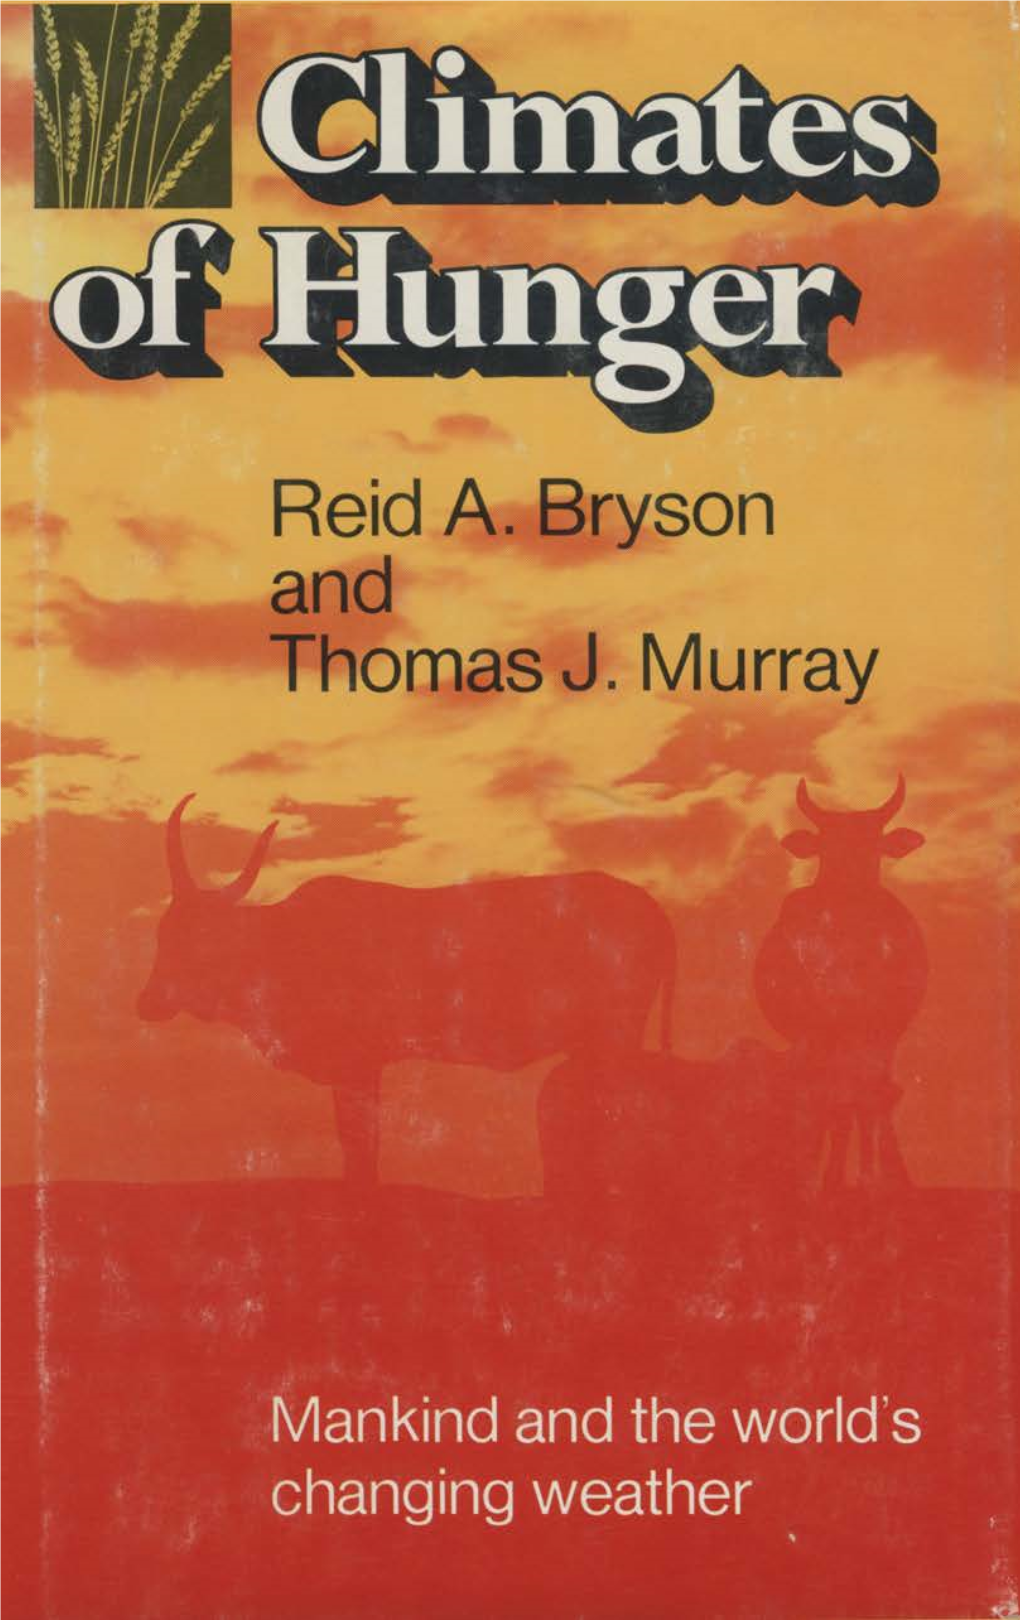 C Lim Ates of H Unger Reid A. Bryson and Thomas J. Murray